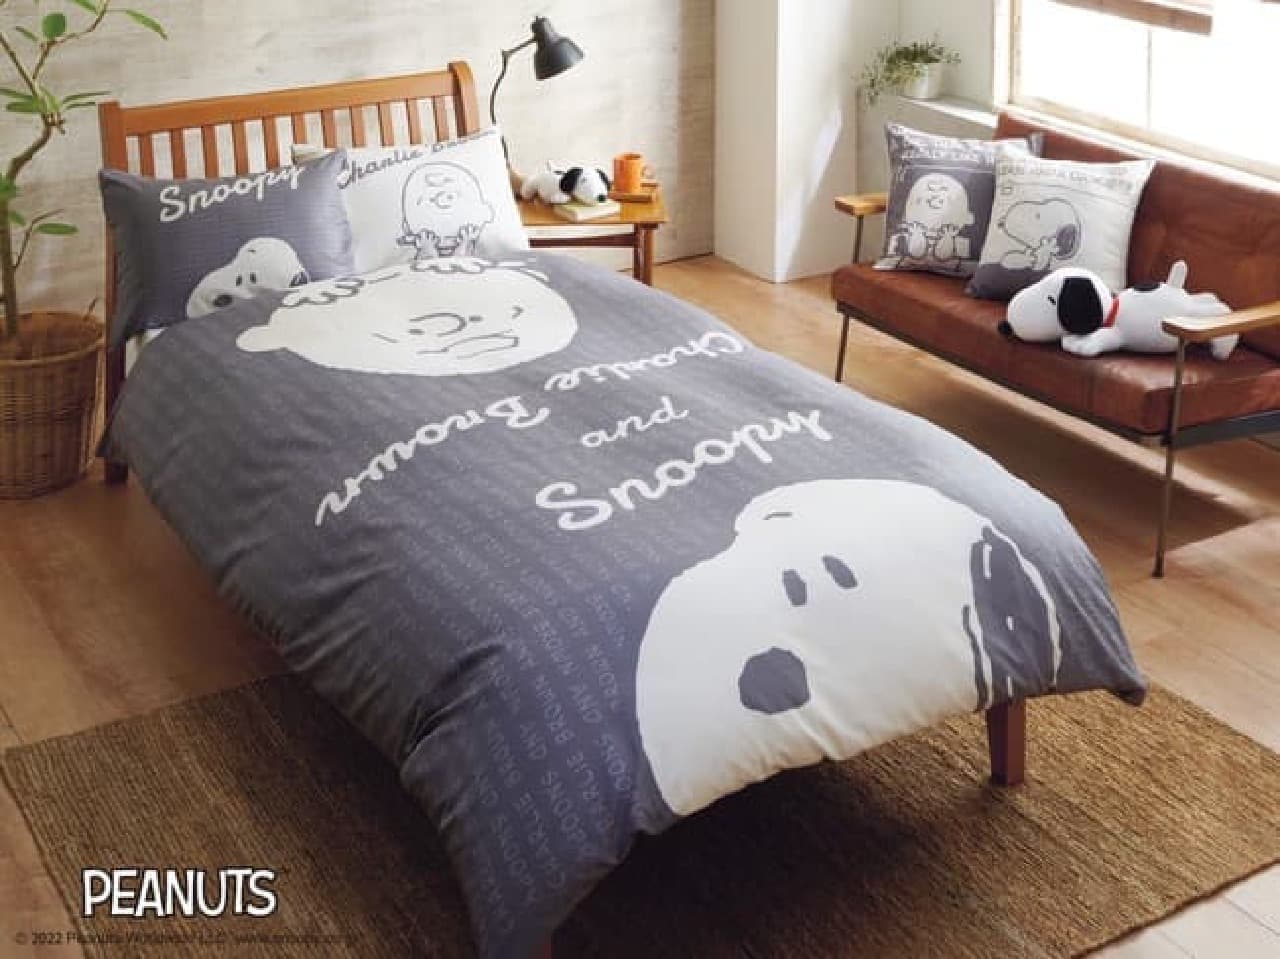 Nishikawa to Launch Spring/Summer "PEANUTS" Bedding -- Snoopy-Patterned Comforter Covers and Pillowcases, etc., and Contact-Cooling Material Mattress Pads